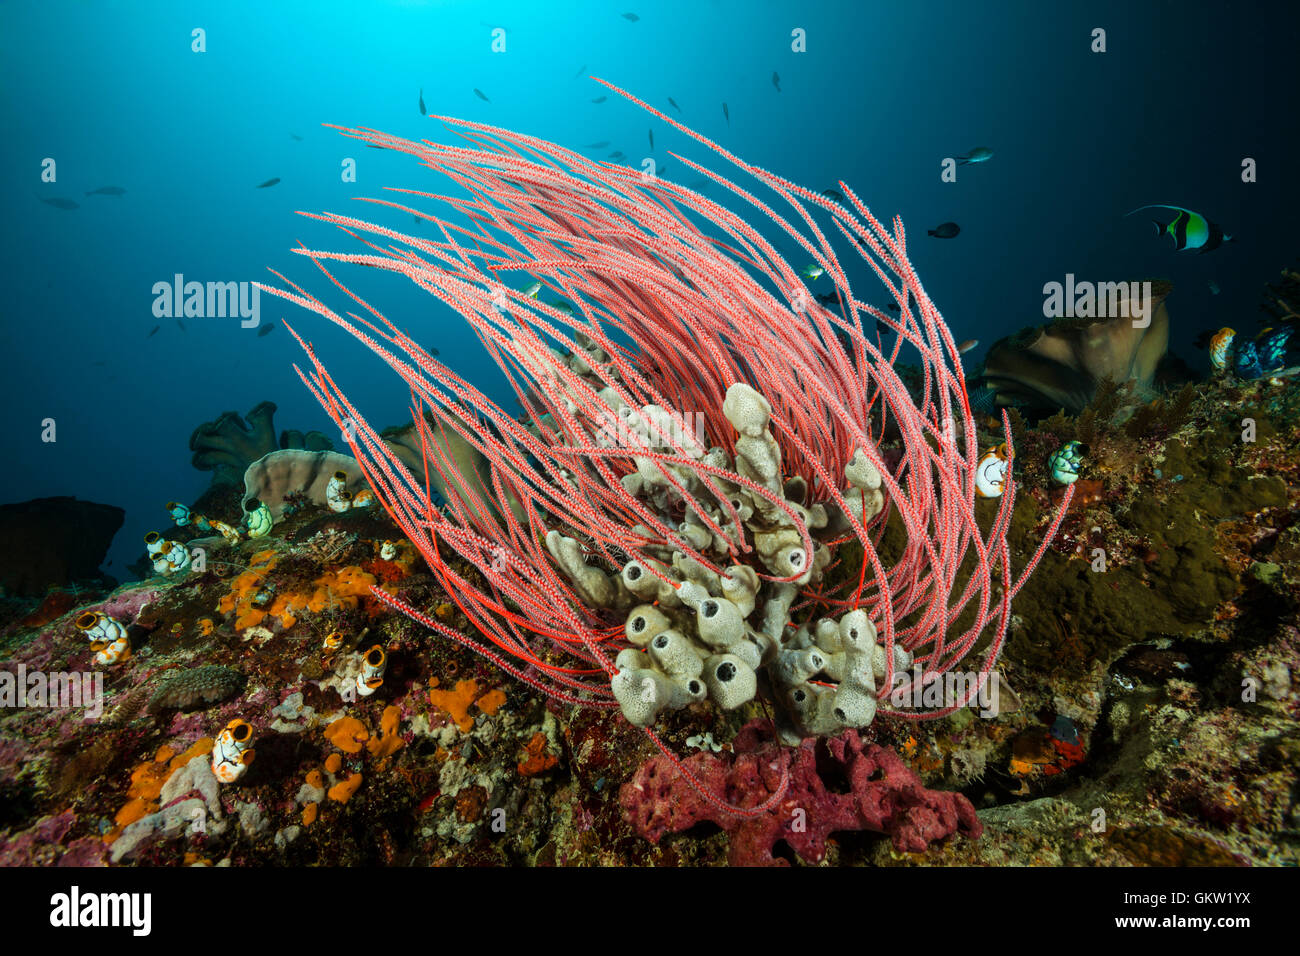 Coral Reef with Red Whip Coral, Ellisella ceratophyta, Ambon, Moluccas, Indonesia Stock Photo